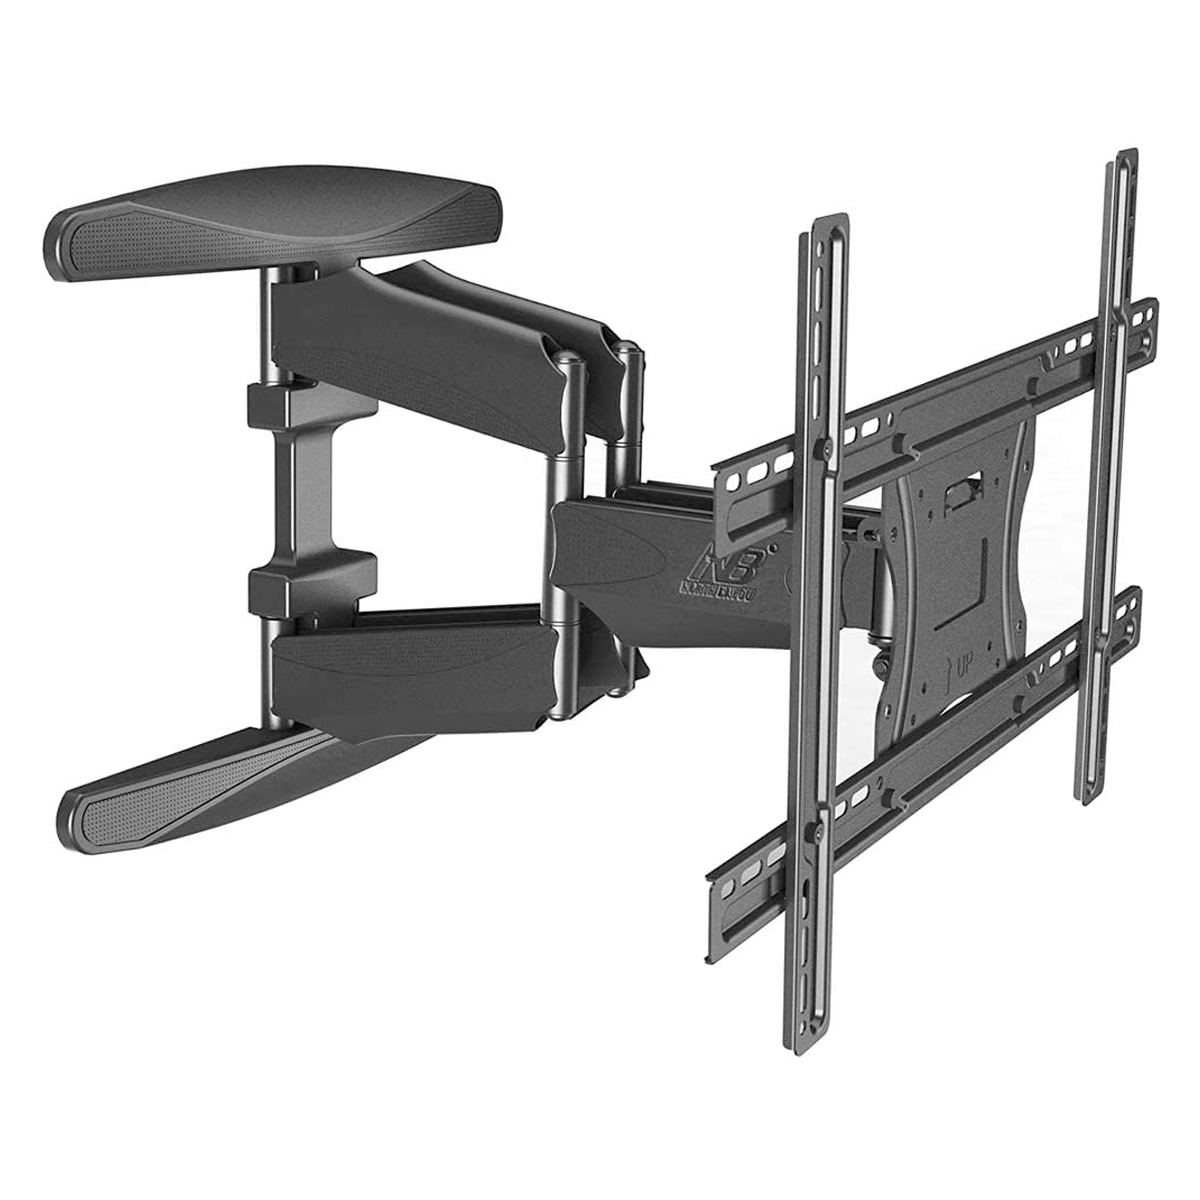 North Bayou Full Motion TV Wall Mount for Most 40-70 Inches LED LCD Computer Monitors and TVs - NORTHBAYOU